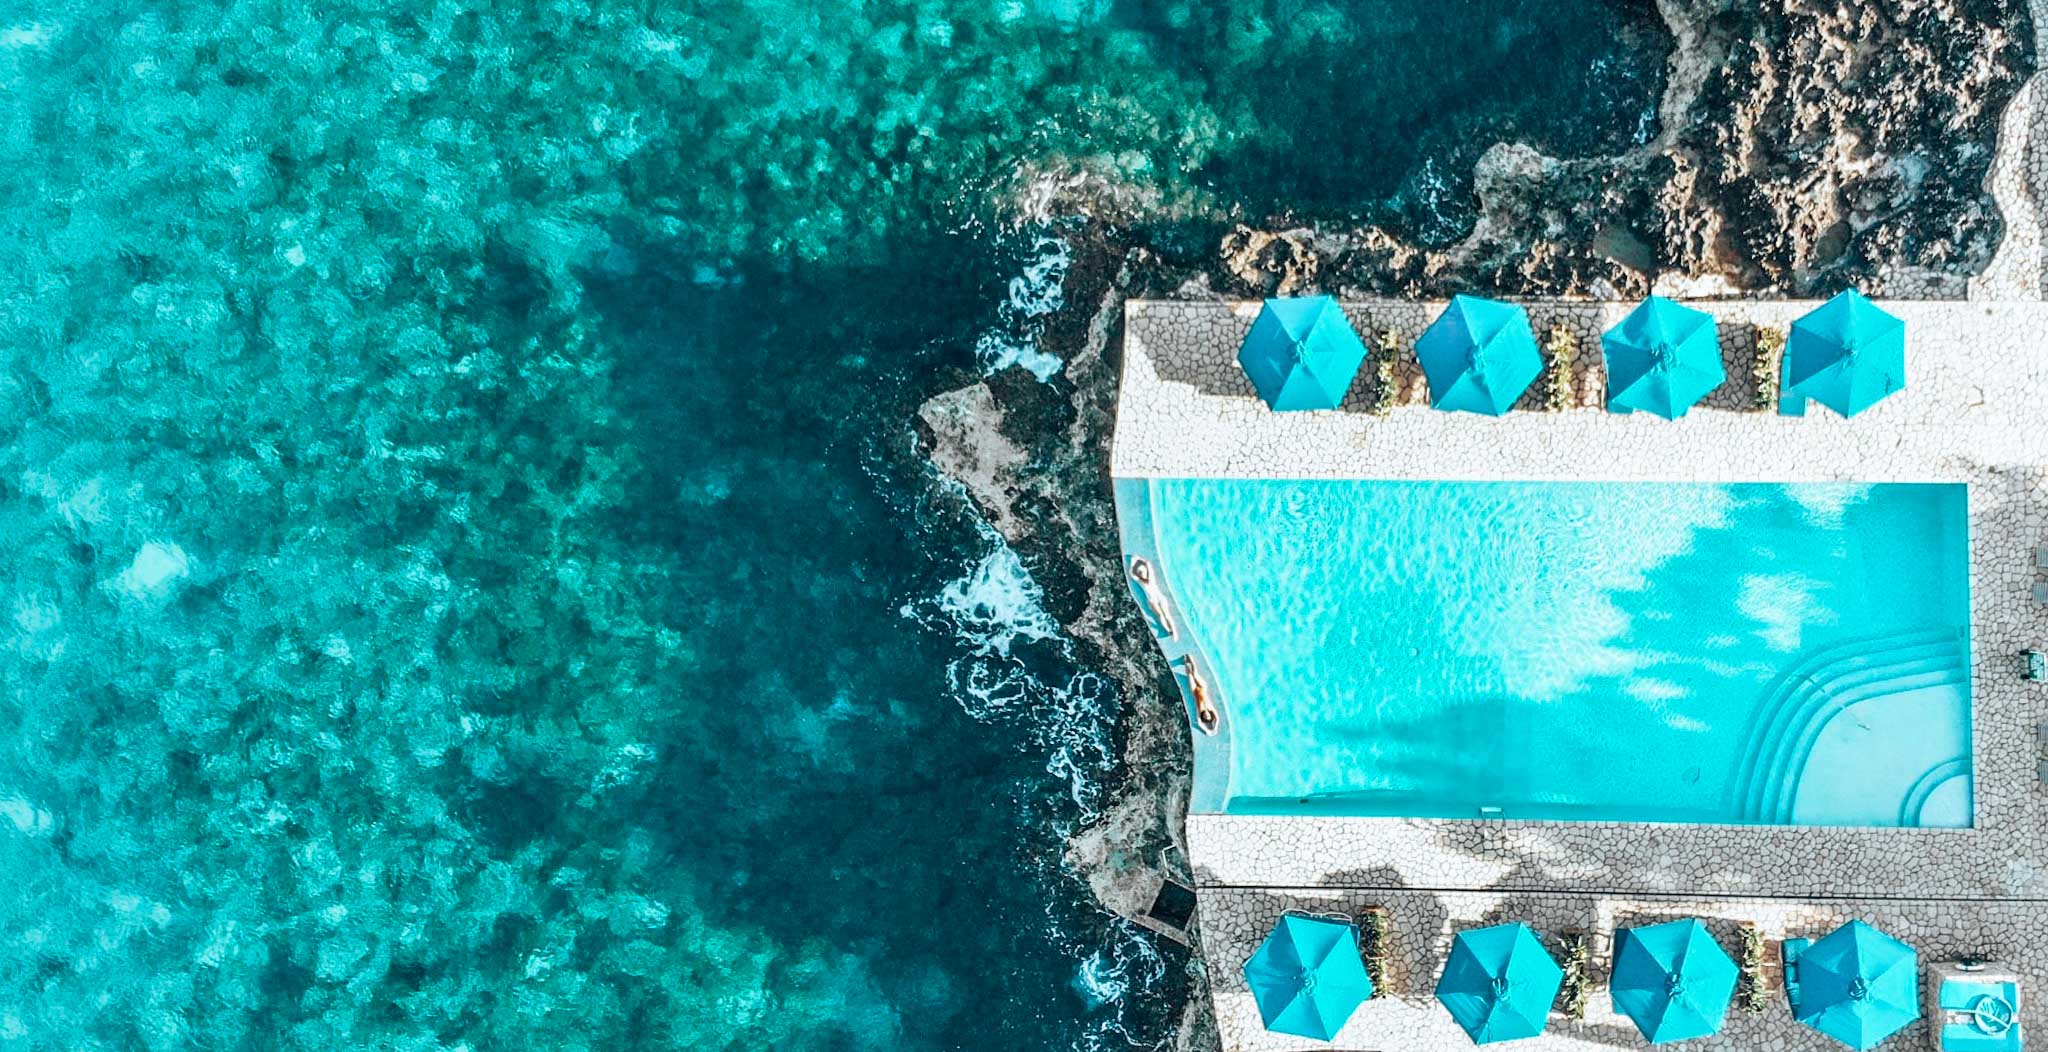 drone photo of two girls lying on the edge of an infinity pool with cliffs and ocean surrounding them